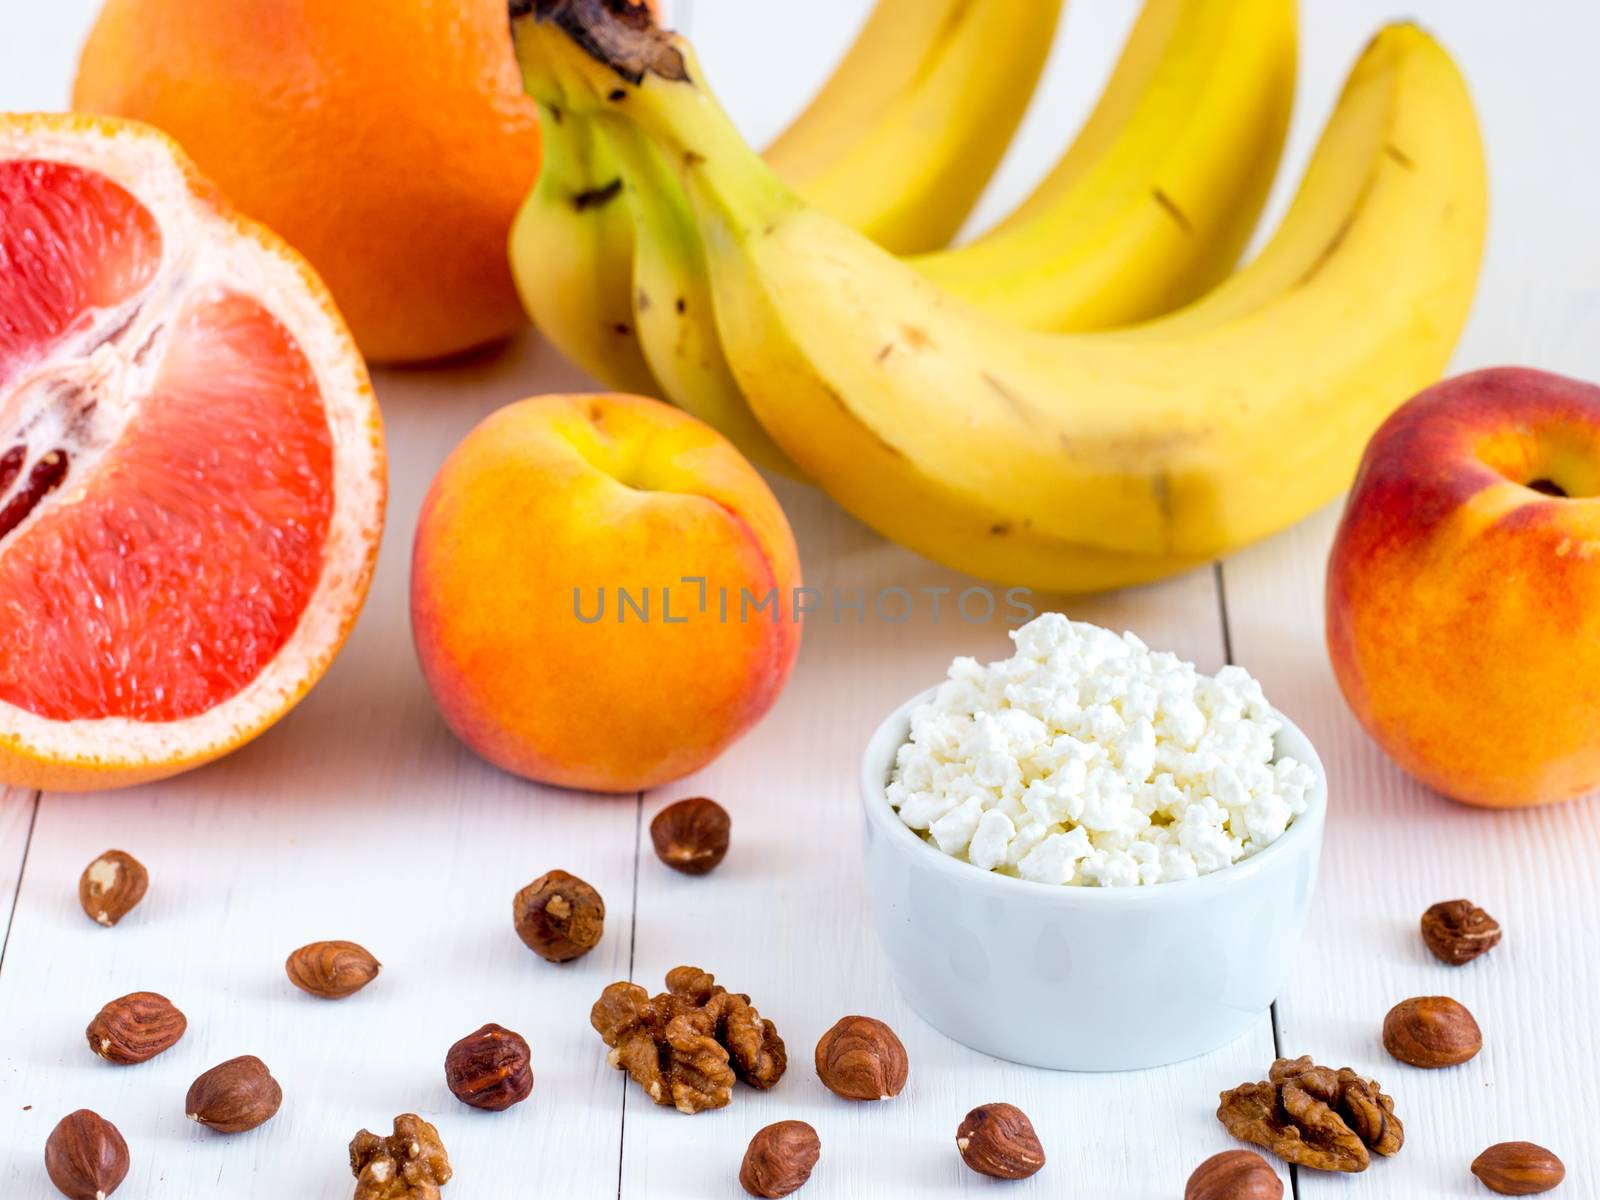 Healthy breakfast: cottage cheese, fruits and nuts on white wooden background. Dieting, healthy lifestyle concept meal